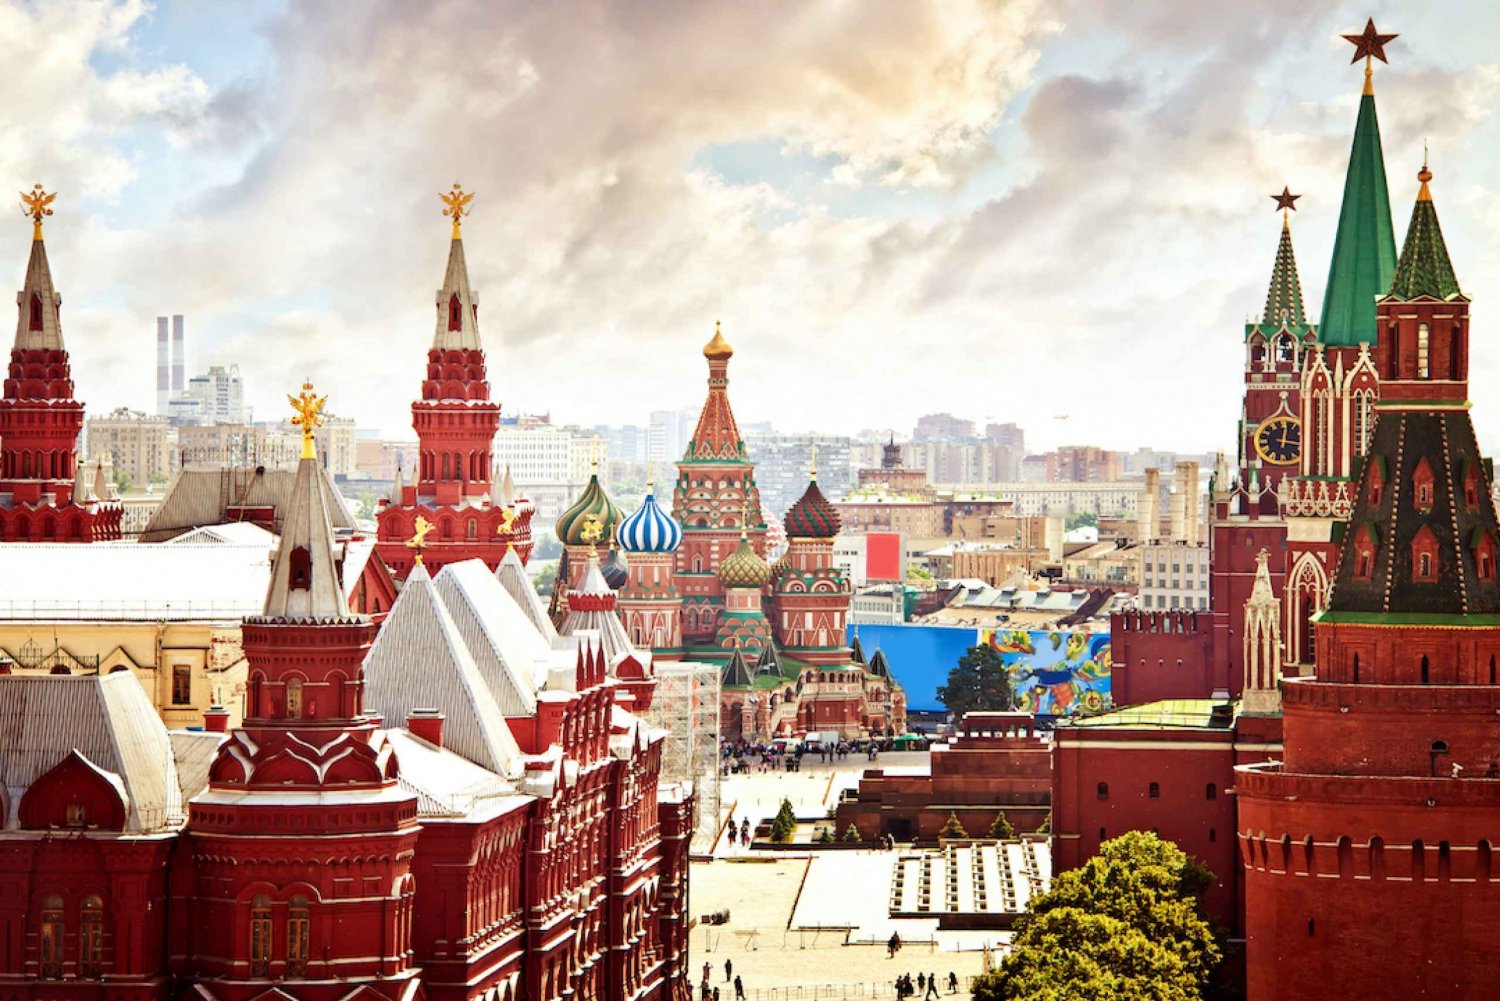 Moscow: City Sights, Metro & Kremlin Museum Tour with Lunch